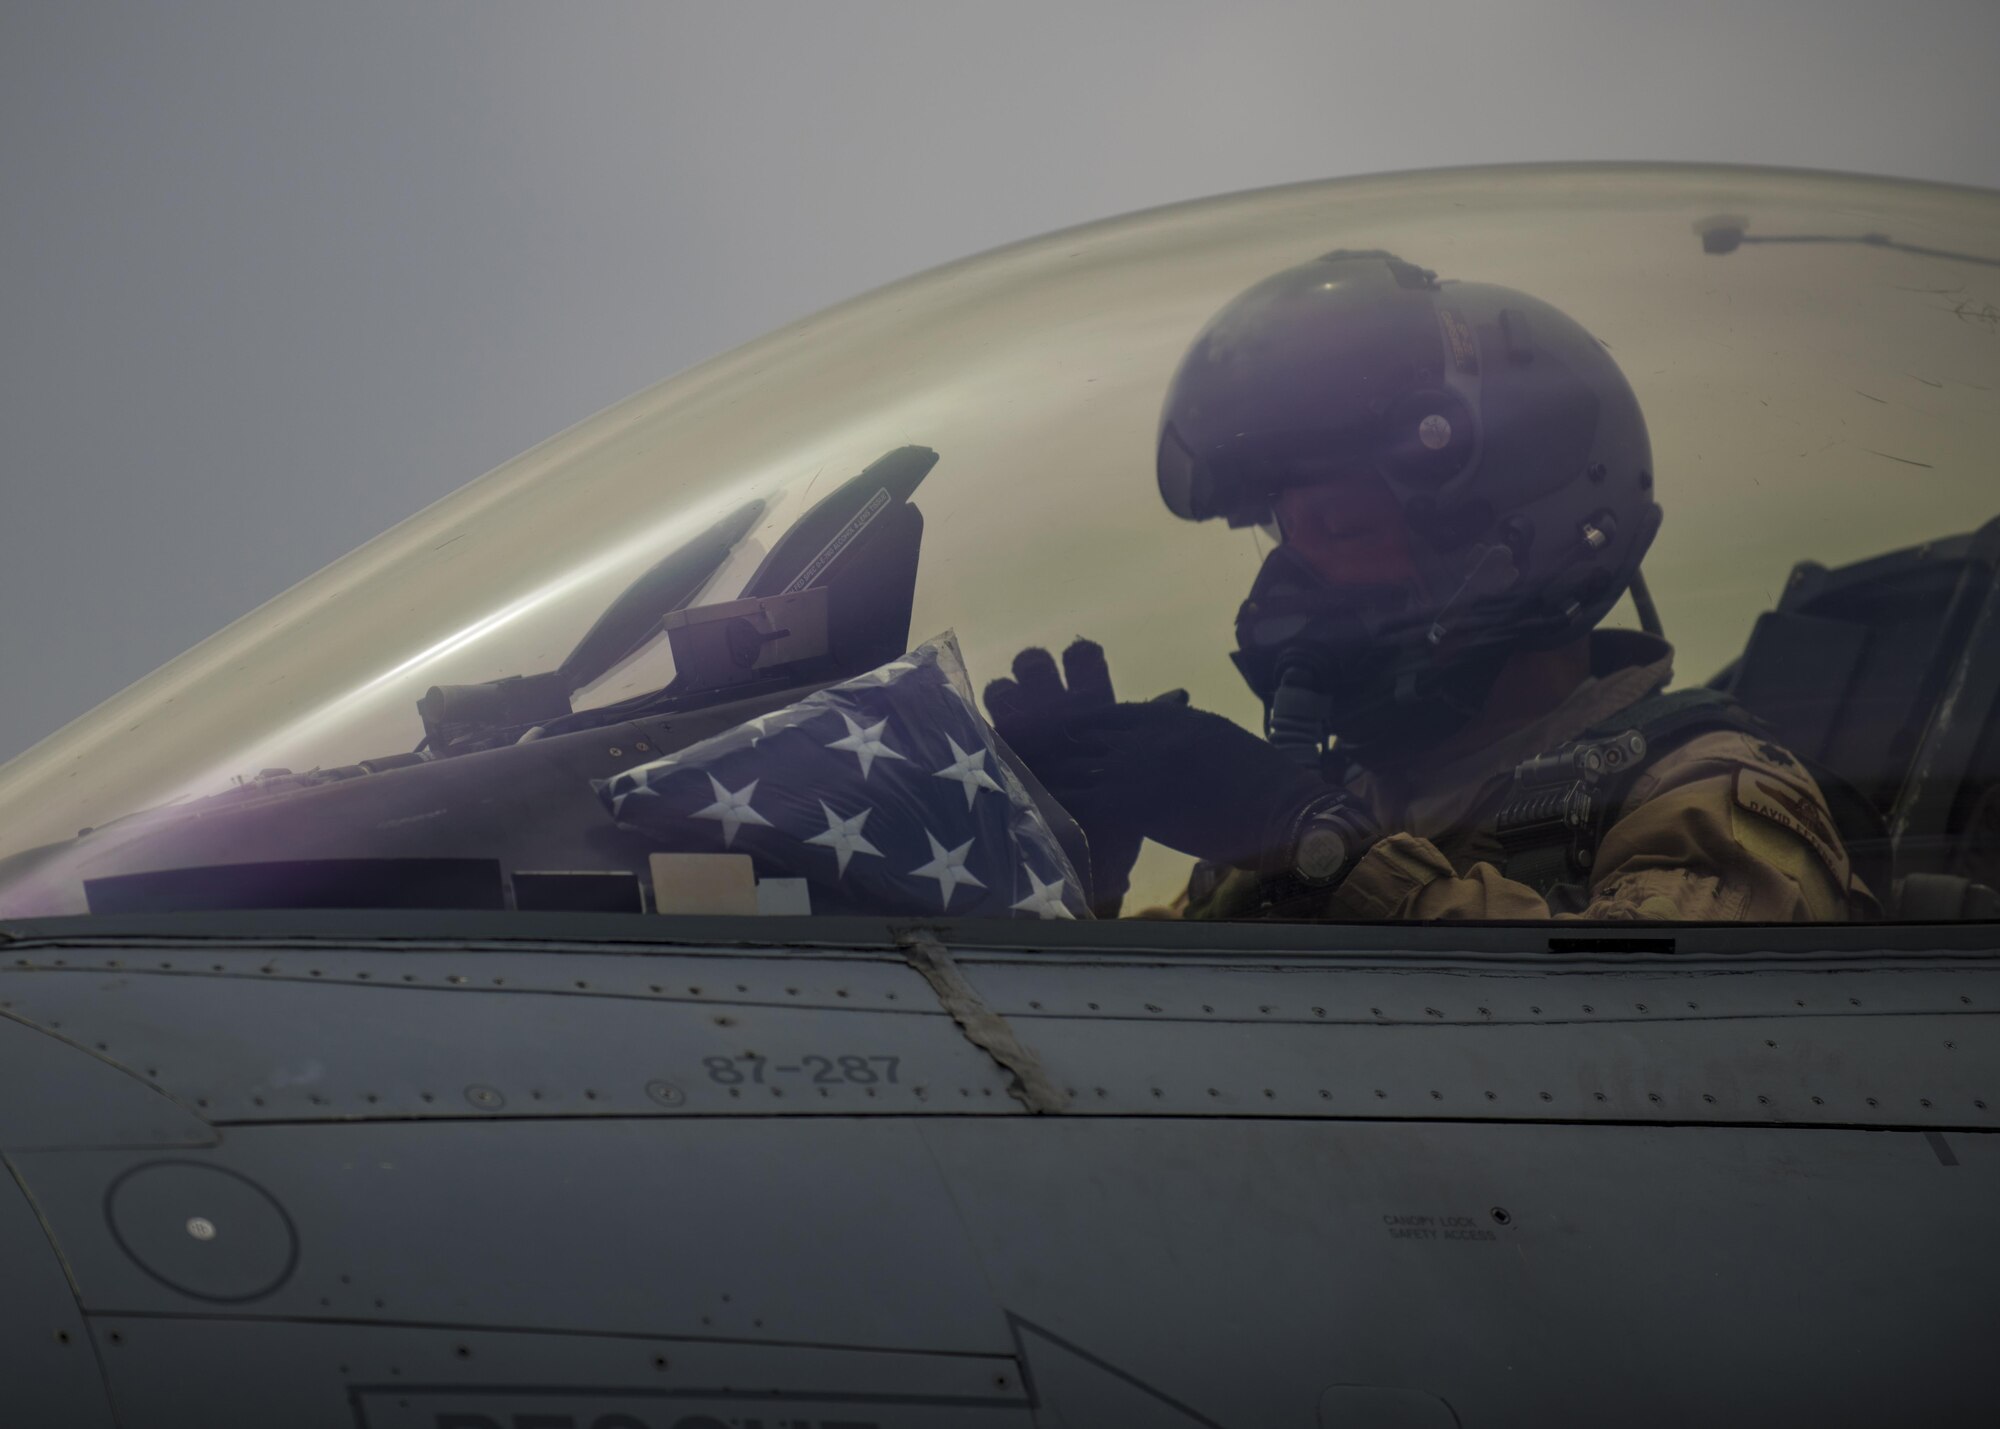 Lt. Col. David Efferson, 457th Expeditionary Fighter Squadron commander, prepares to taxi out in an F-16C Fighting Falcon, June 28, 2016, Bagram Airfield, Afghanistan. The 457th EFS is Air Force Reserve Command unit out of Naval Air Station Fort Worth Joint Reserve Base, Texas who continuously supports Operation Freedom's Sentinel and the NATO Resolute Support mission. (U.S. Air Force photo by Senior Airman Justyn M. Freeman)